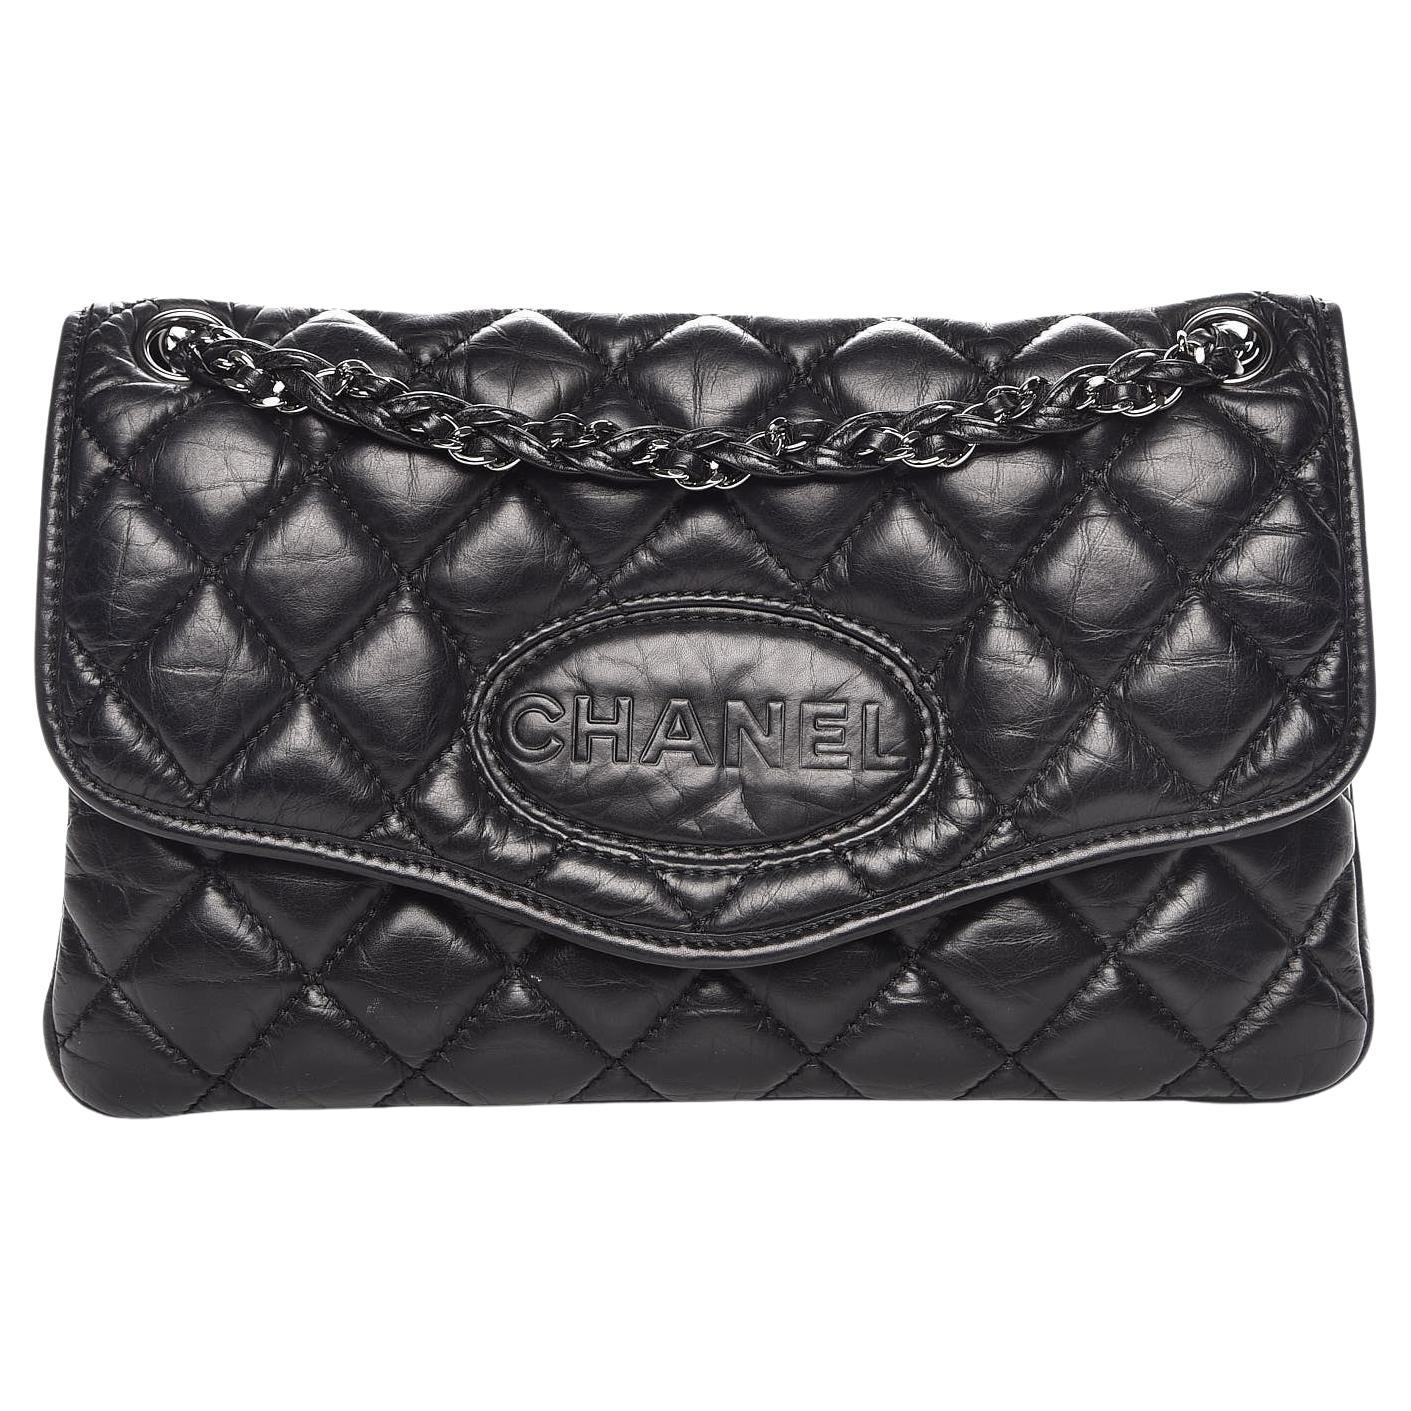 Chanel 2005 Vintage Soft Distressed Leather Diamond Quilted Classic Flap Bag en vente